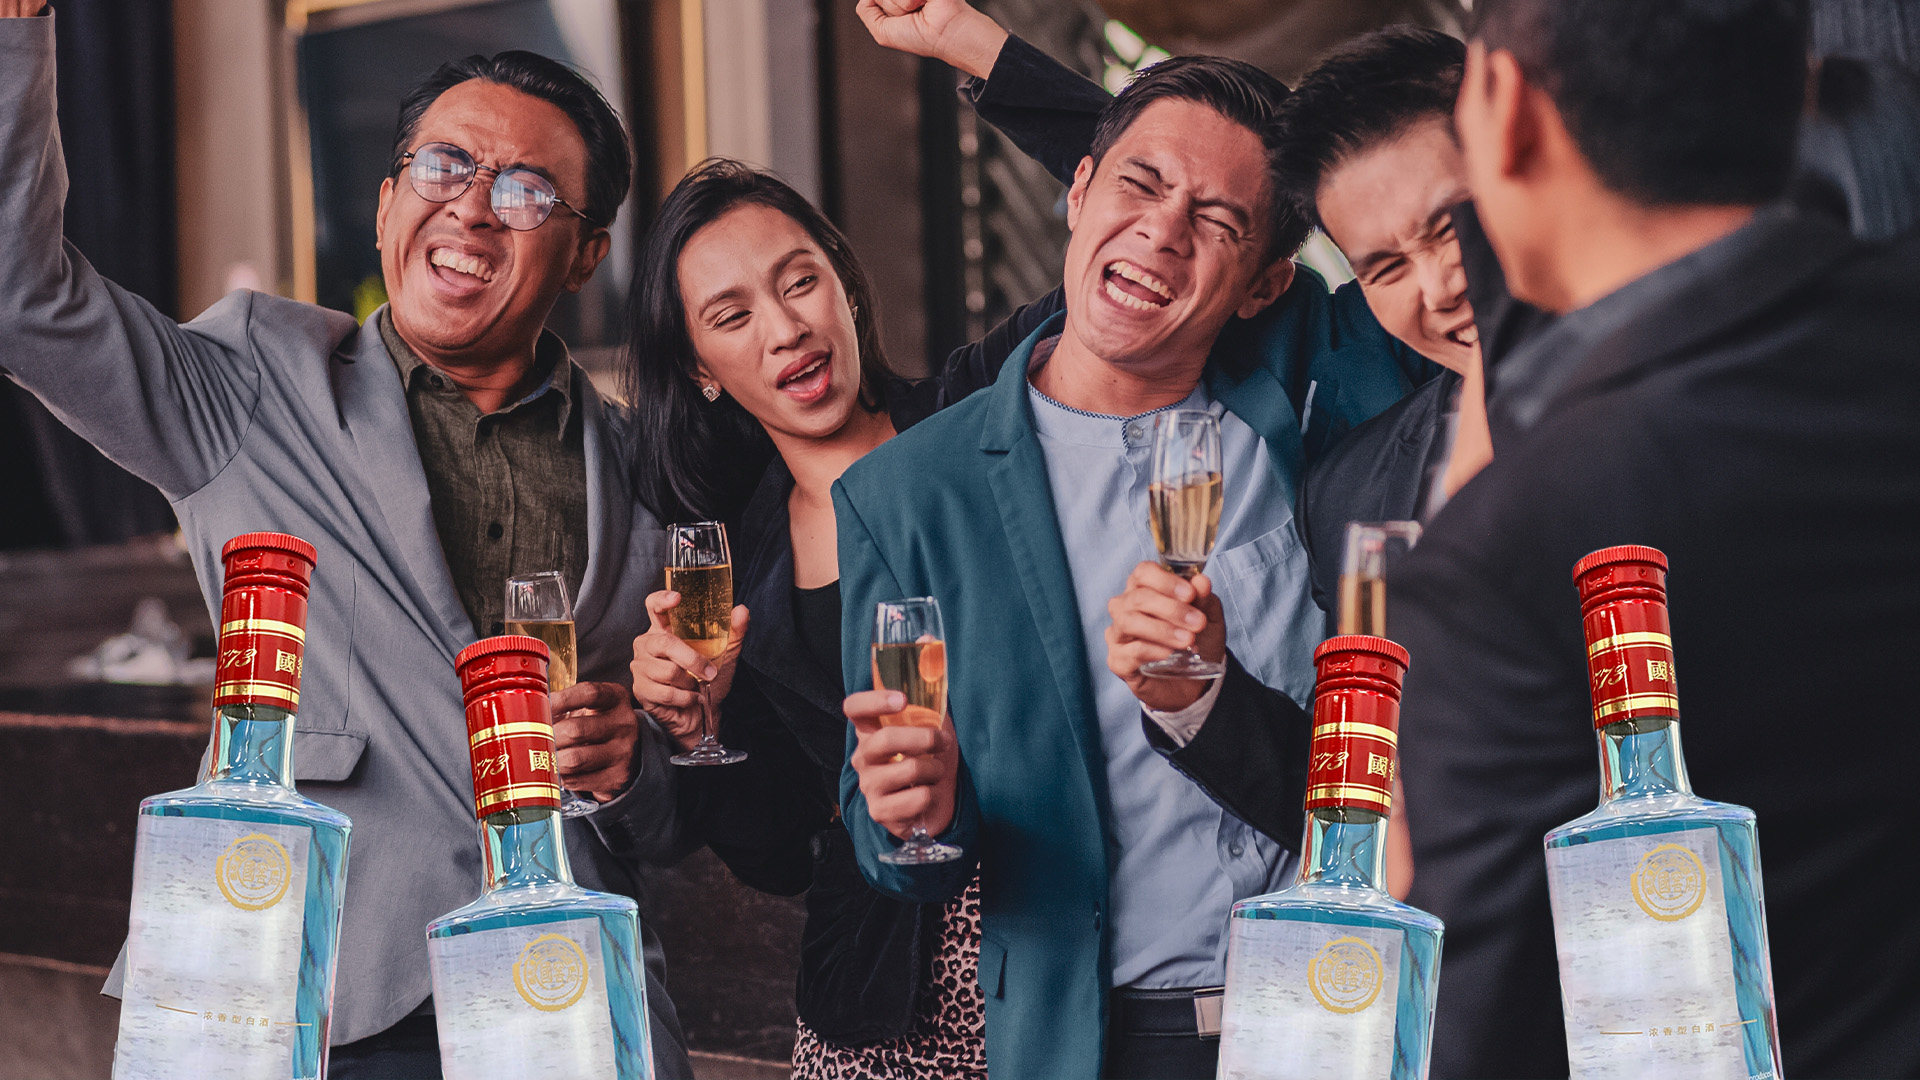 The death of a man in China after he downed a litre of strong liquor in just 10 minutes at an office party has prompted fresh online calls for an end to the culture of heavy work-related drinking on the mainland. Photo: SCMP composite/Shutterstock